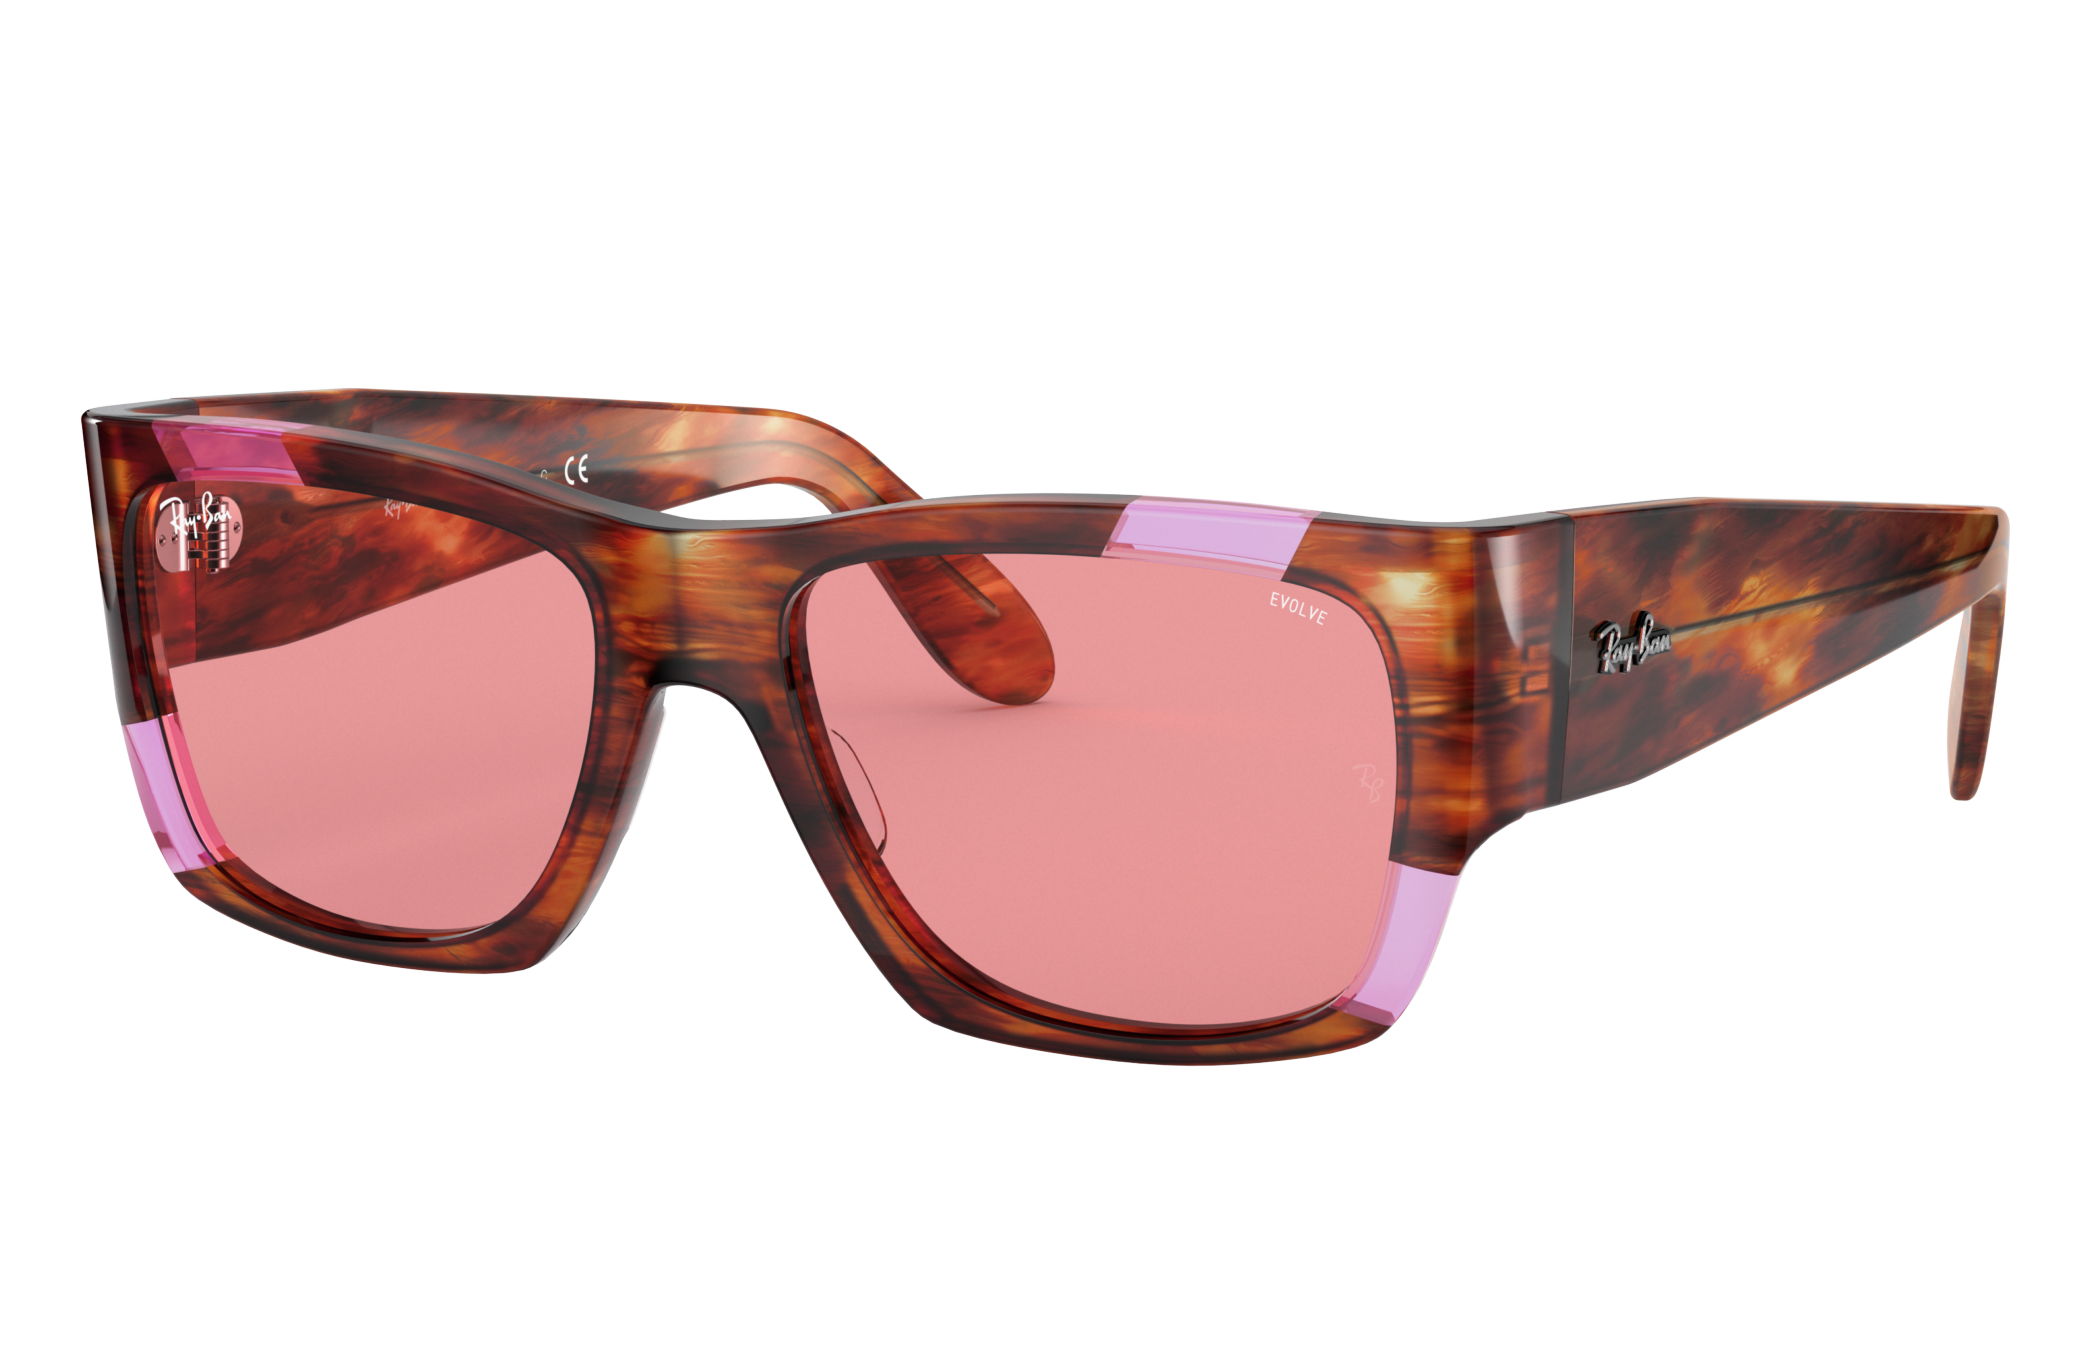 Nomad Pink Fluo Sunglasses in Striped Havana & Pink Fluo and Pink | Ray-Ban®